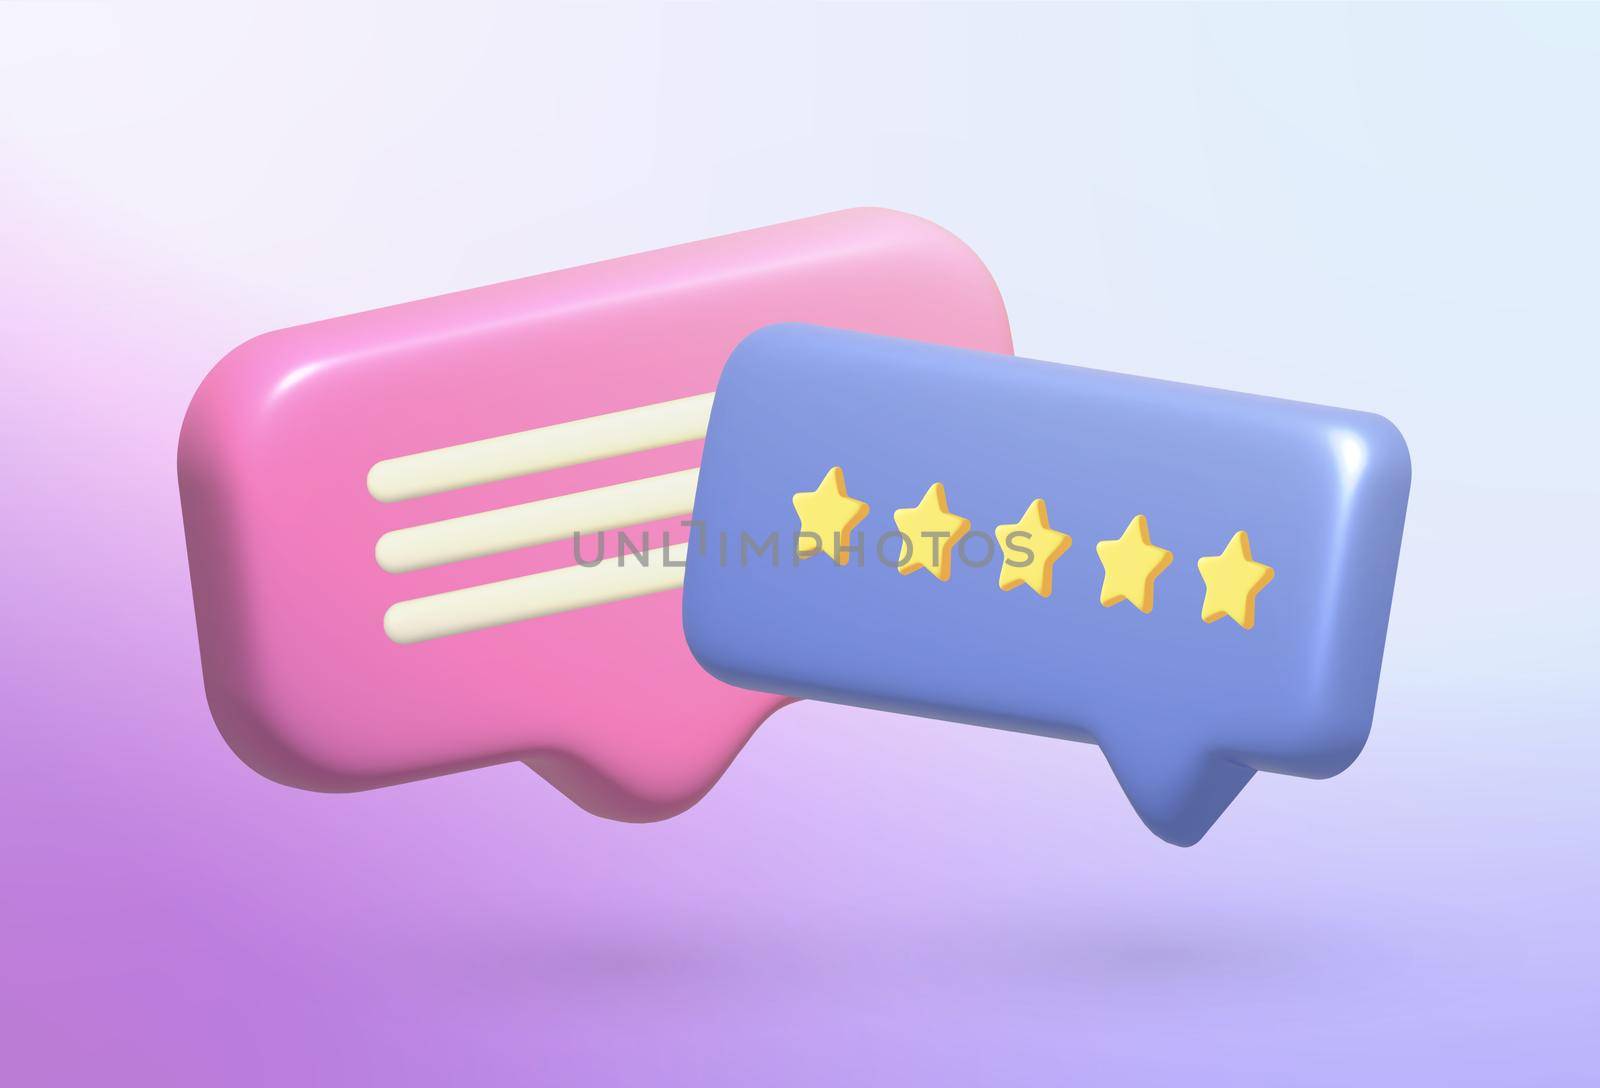 3D Bubble Speech Notification and Five Star Feedback illustration.